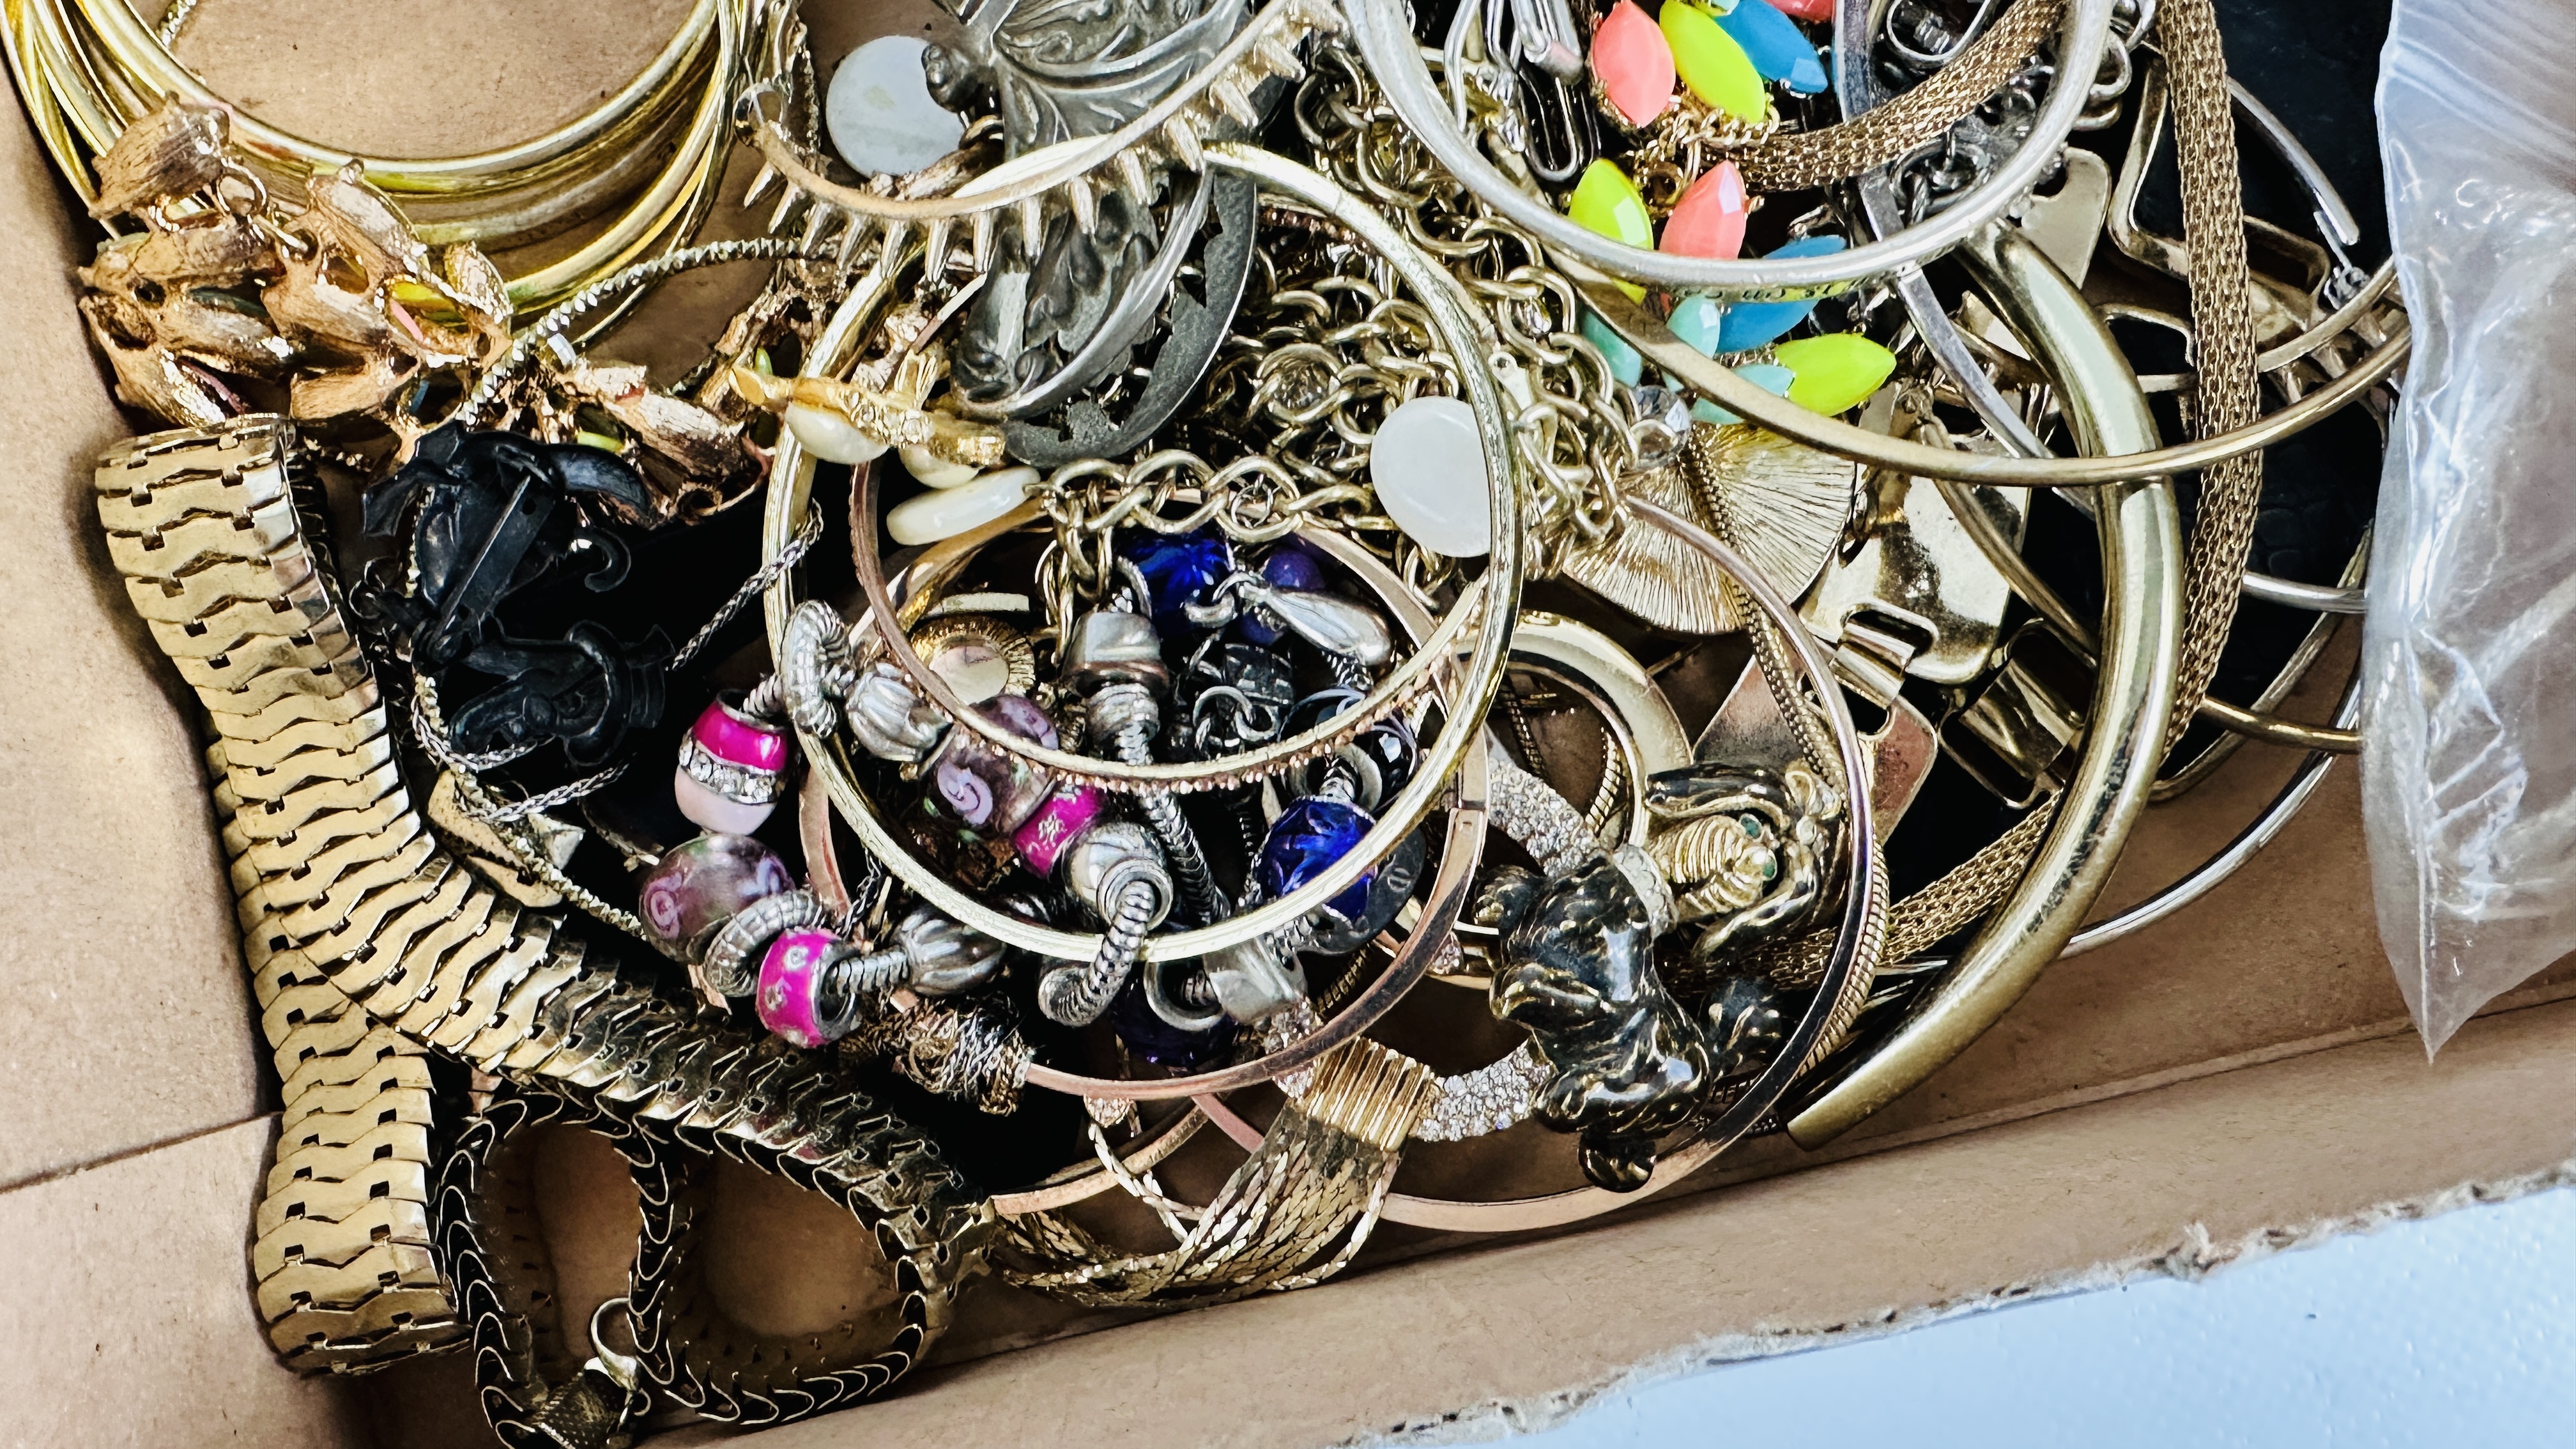 BOX MIXED COSTUME JEWELLERY INCLUDING NECKLACES, BANGLES, BRACELETS, BROOCHES, EARRINGS, ETC. - Image 5 of 6